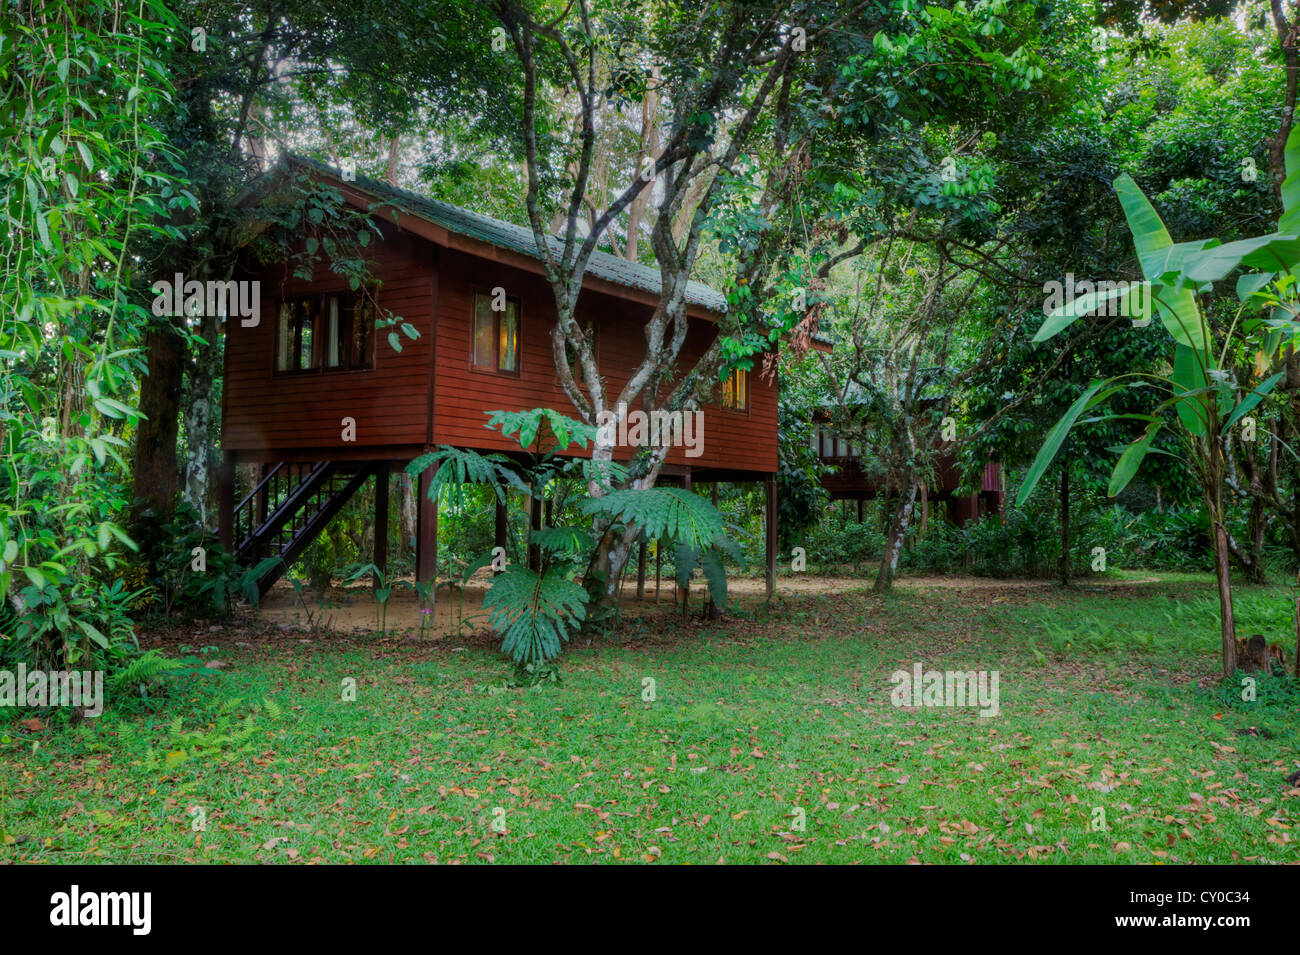 TREE HOUSES are the specialty of OUR JUNGLE HOUSE a lodge near KHAO SOK NATIONAL PARK - SURATHANI PROVENCE, THAILAND Stock Photo